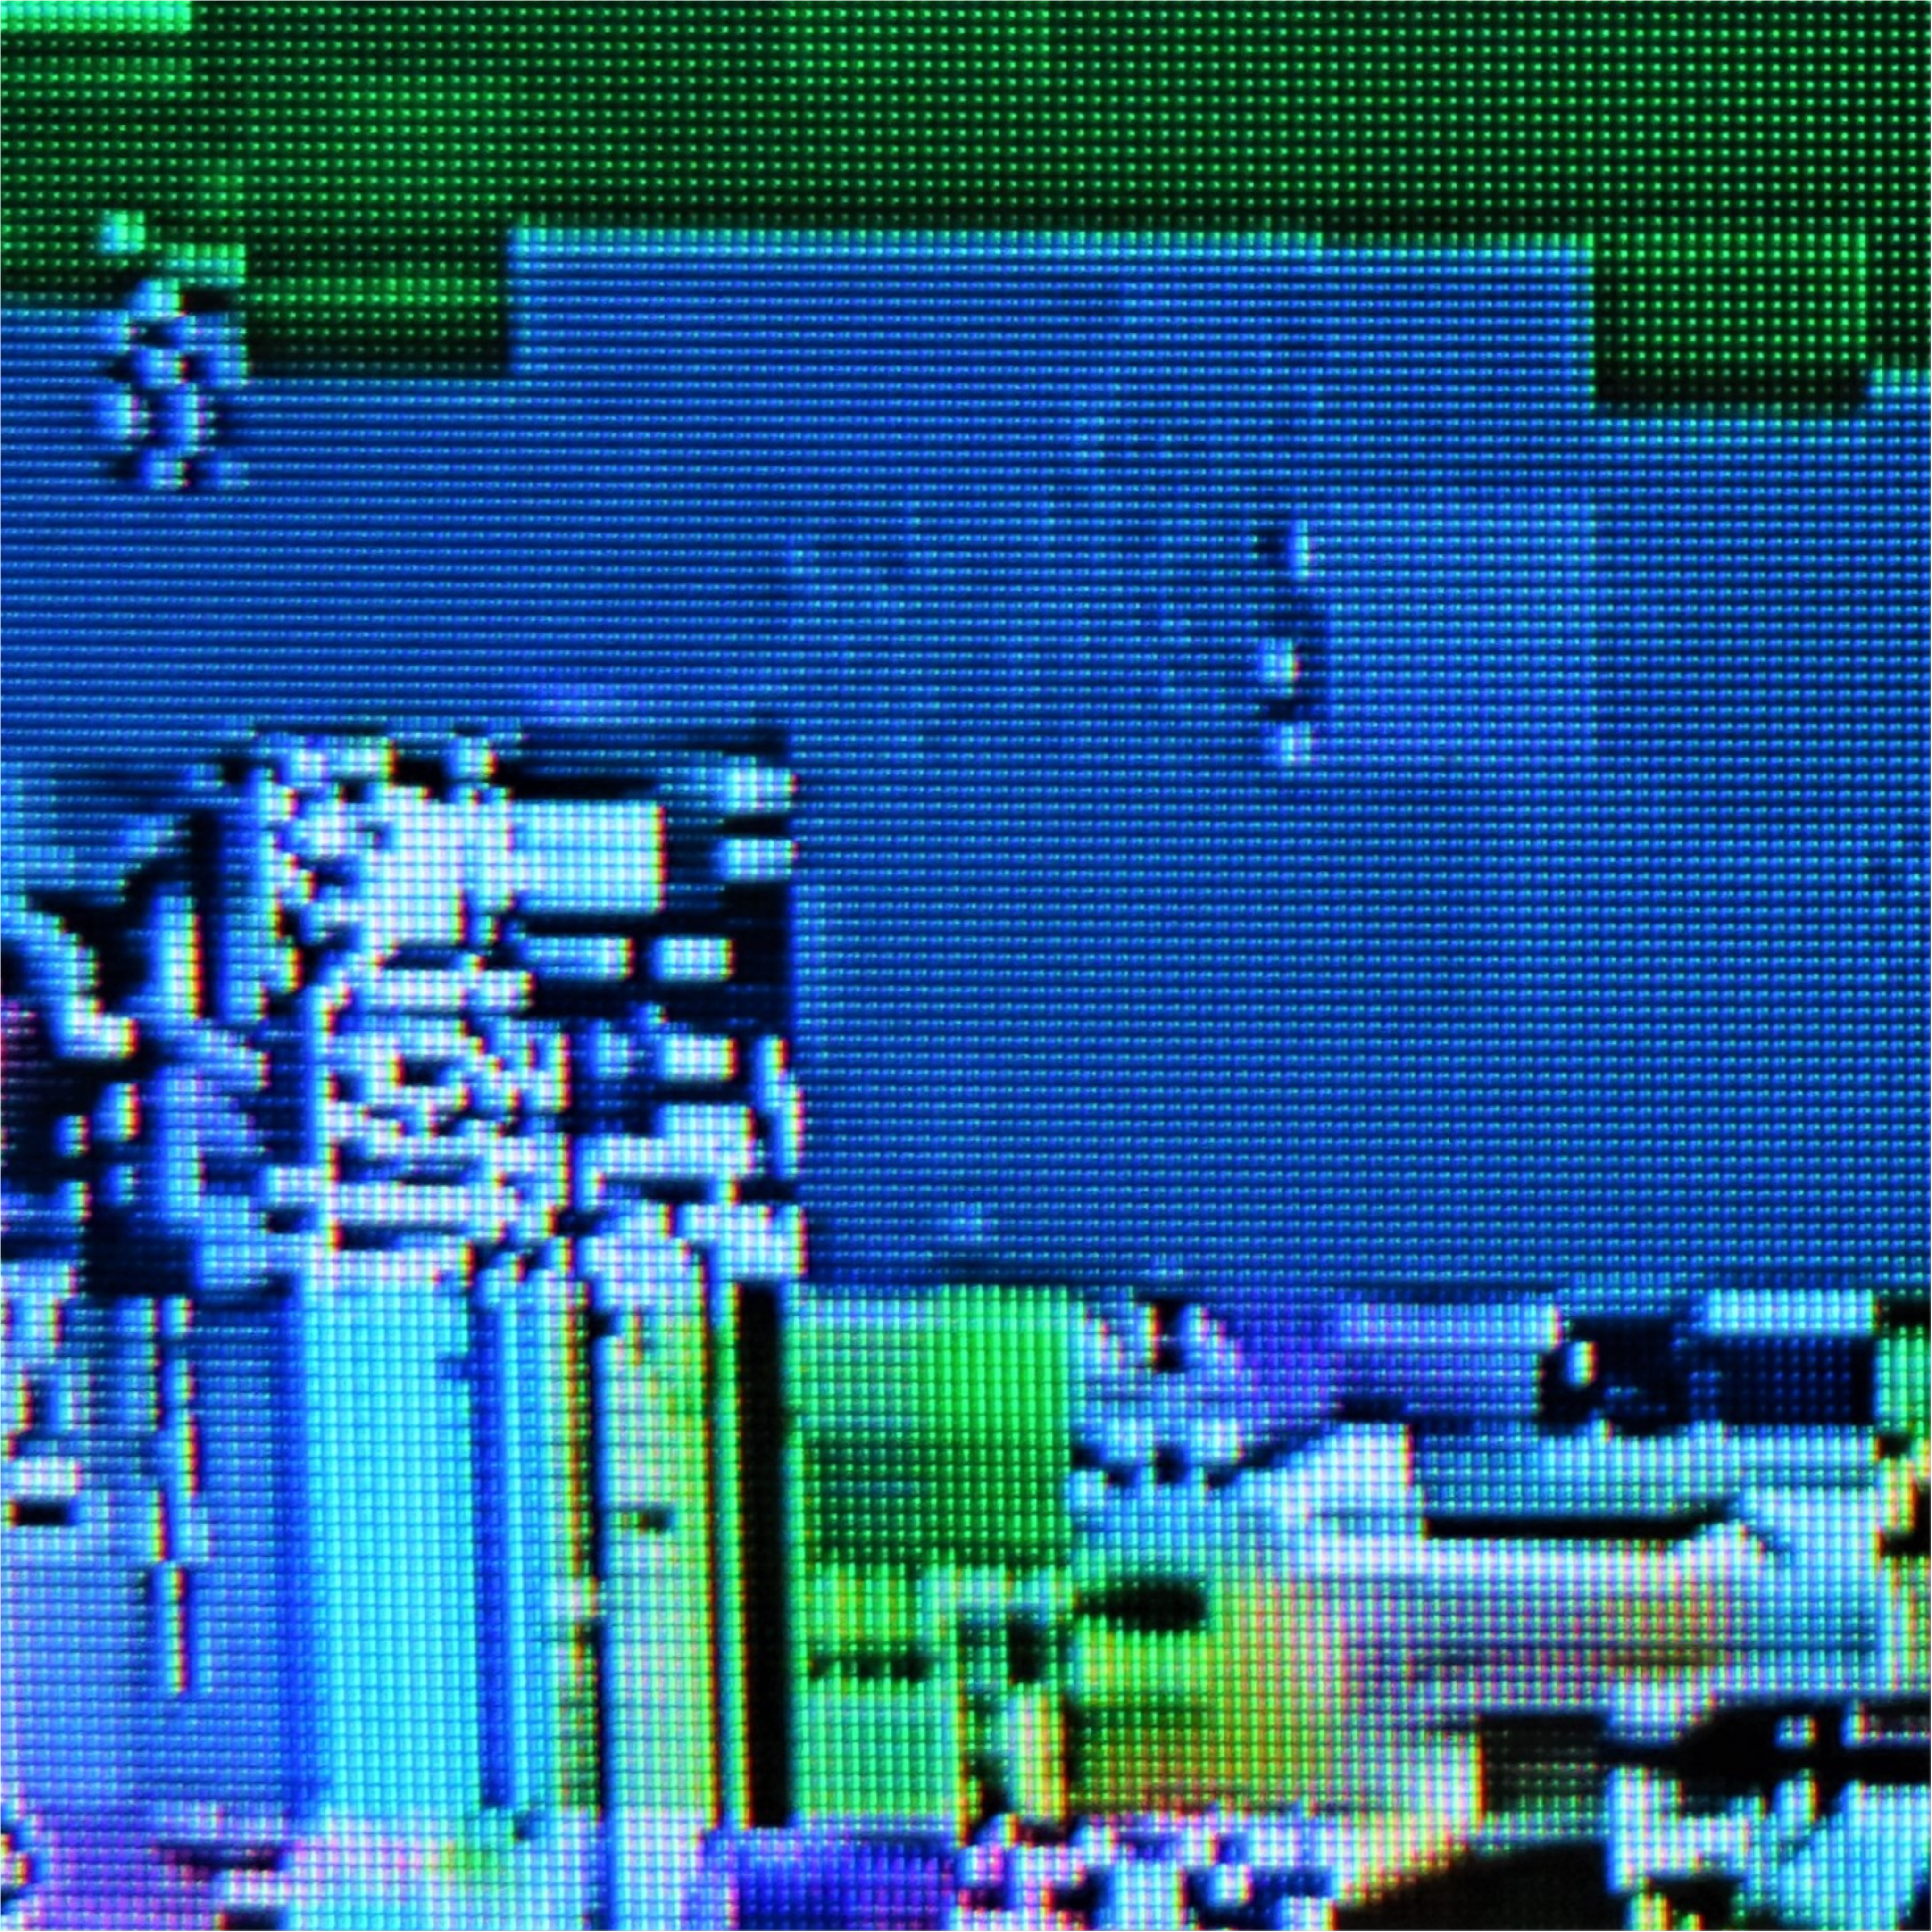 Televisual Glitch Abstraction I